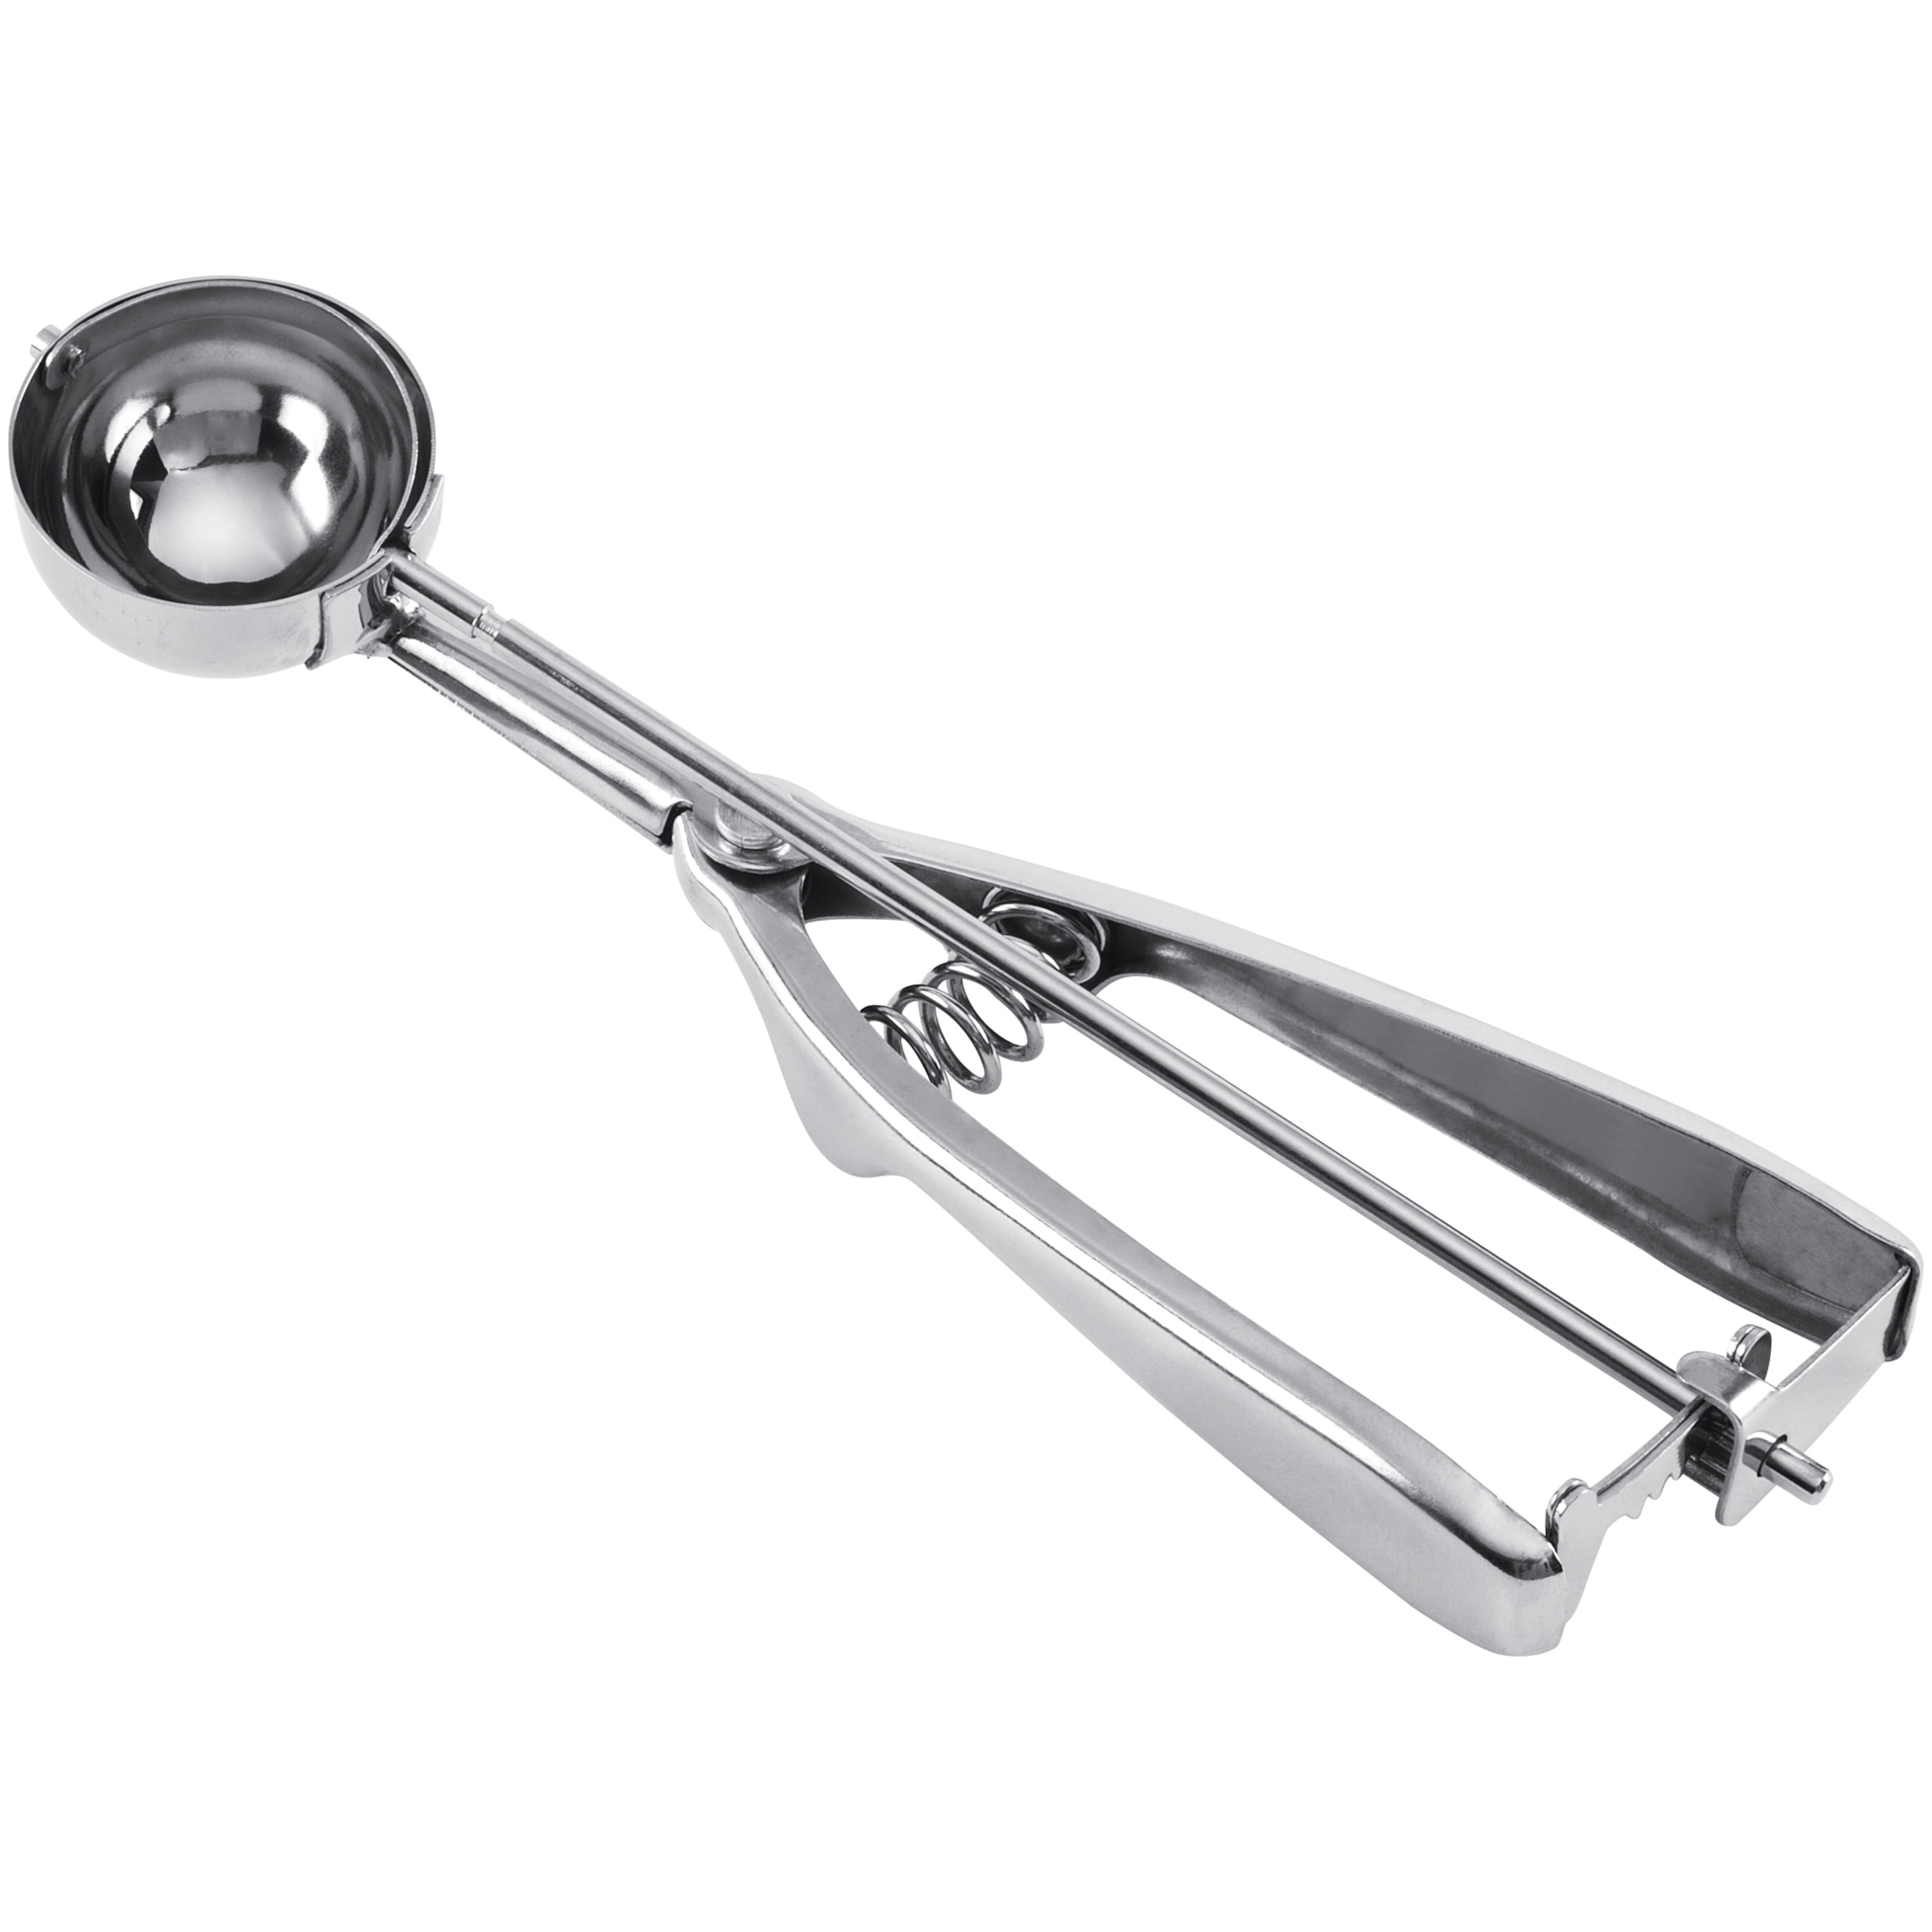 Comfy Grip 3.25 oz Stainless Steel #12 Portion Scoop - with Green Ambidextrous Handle - 1 Count Box